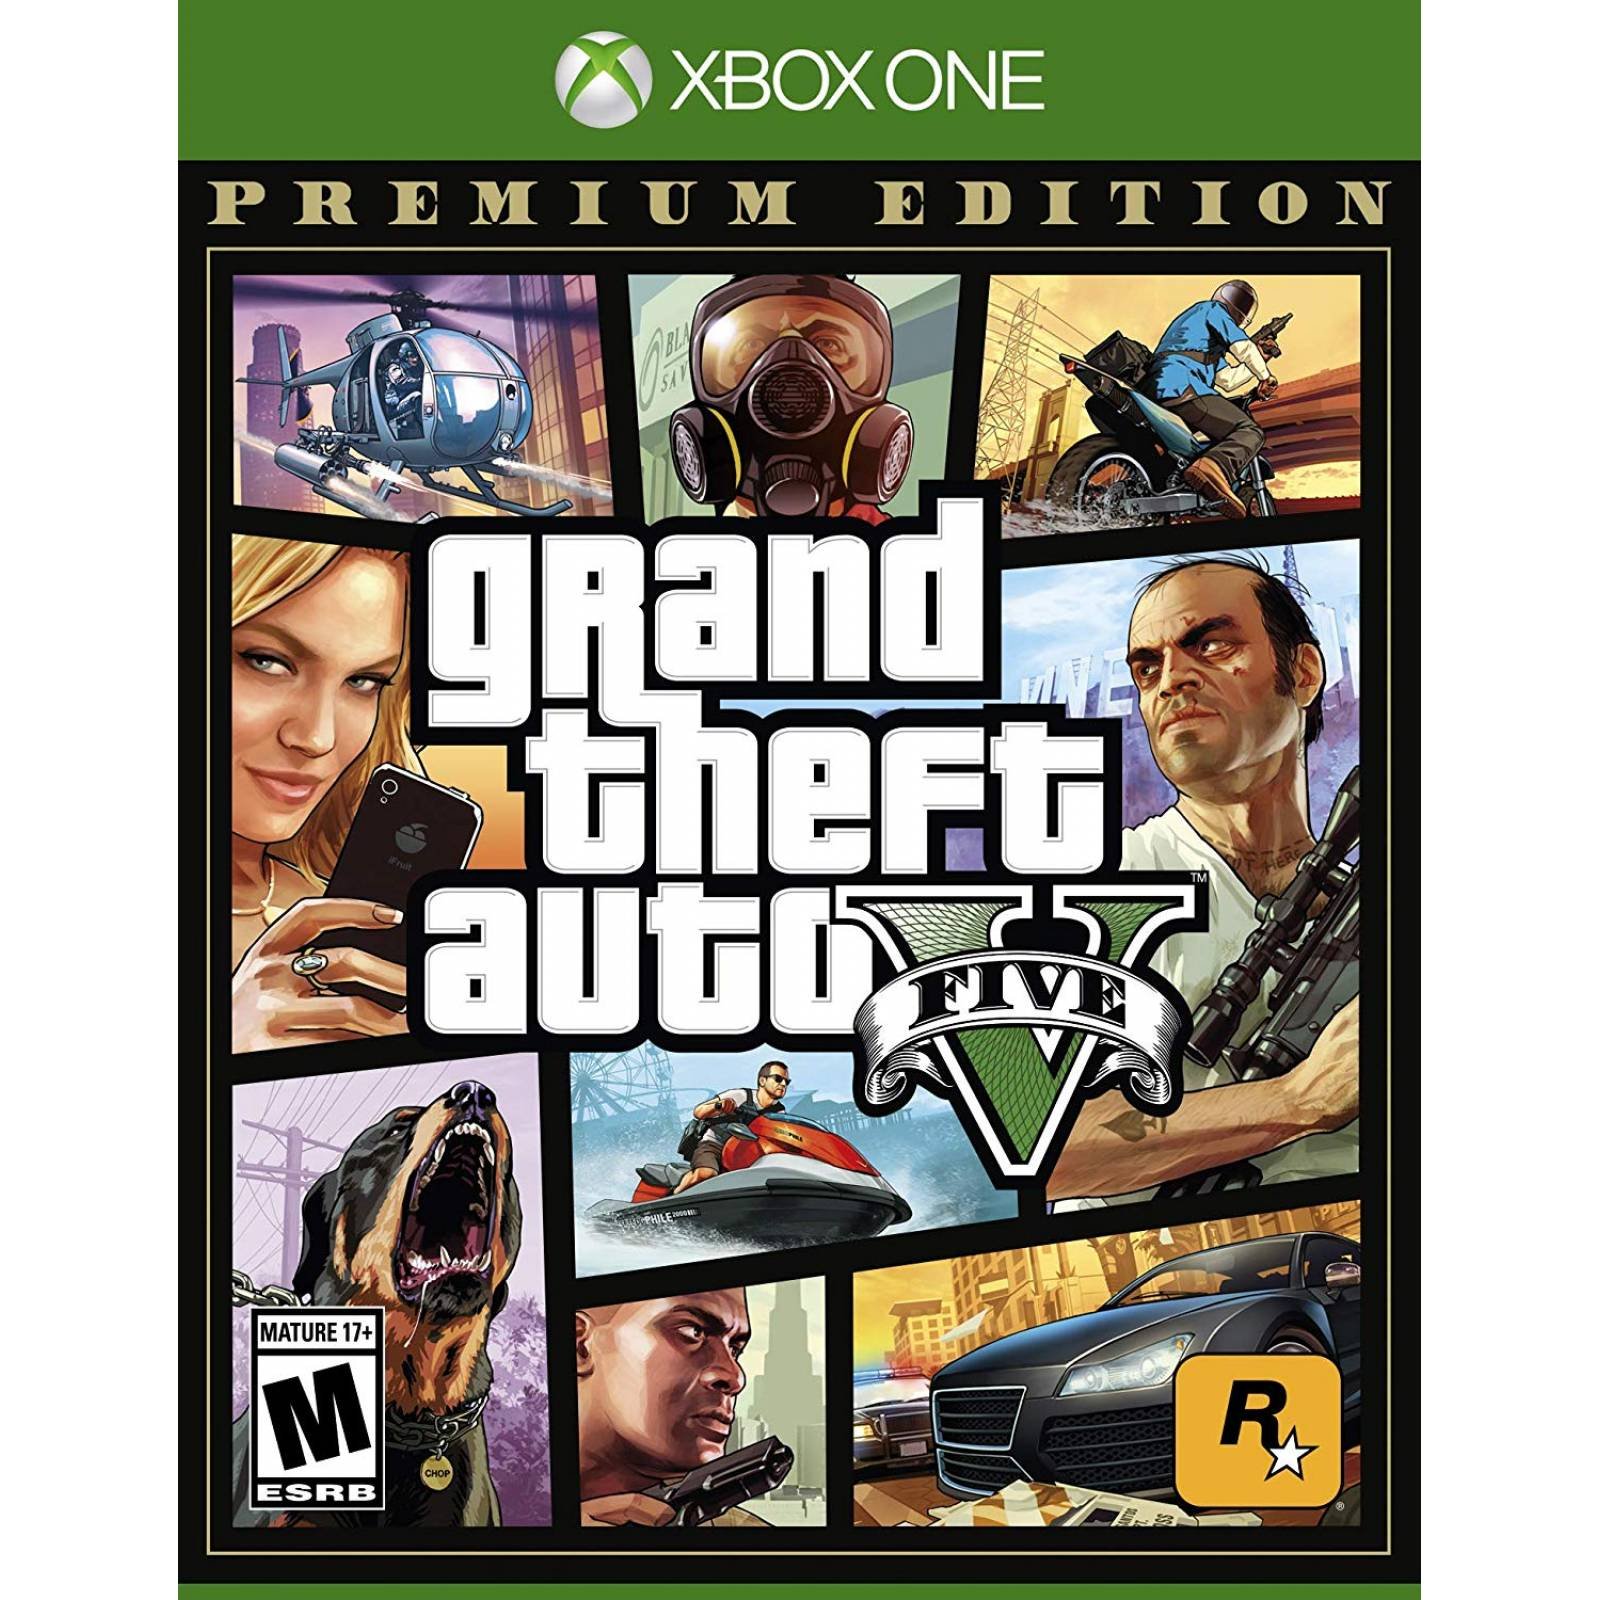 gta-5-apk-xbox-one-how-to-download-fifa-14-for-free-on-pc-windows-7